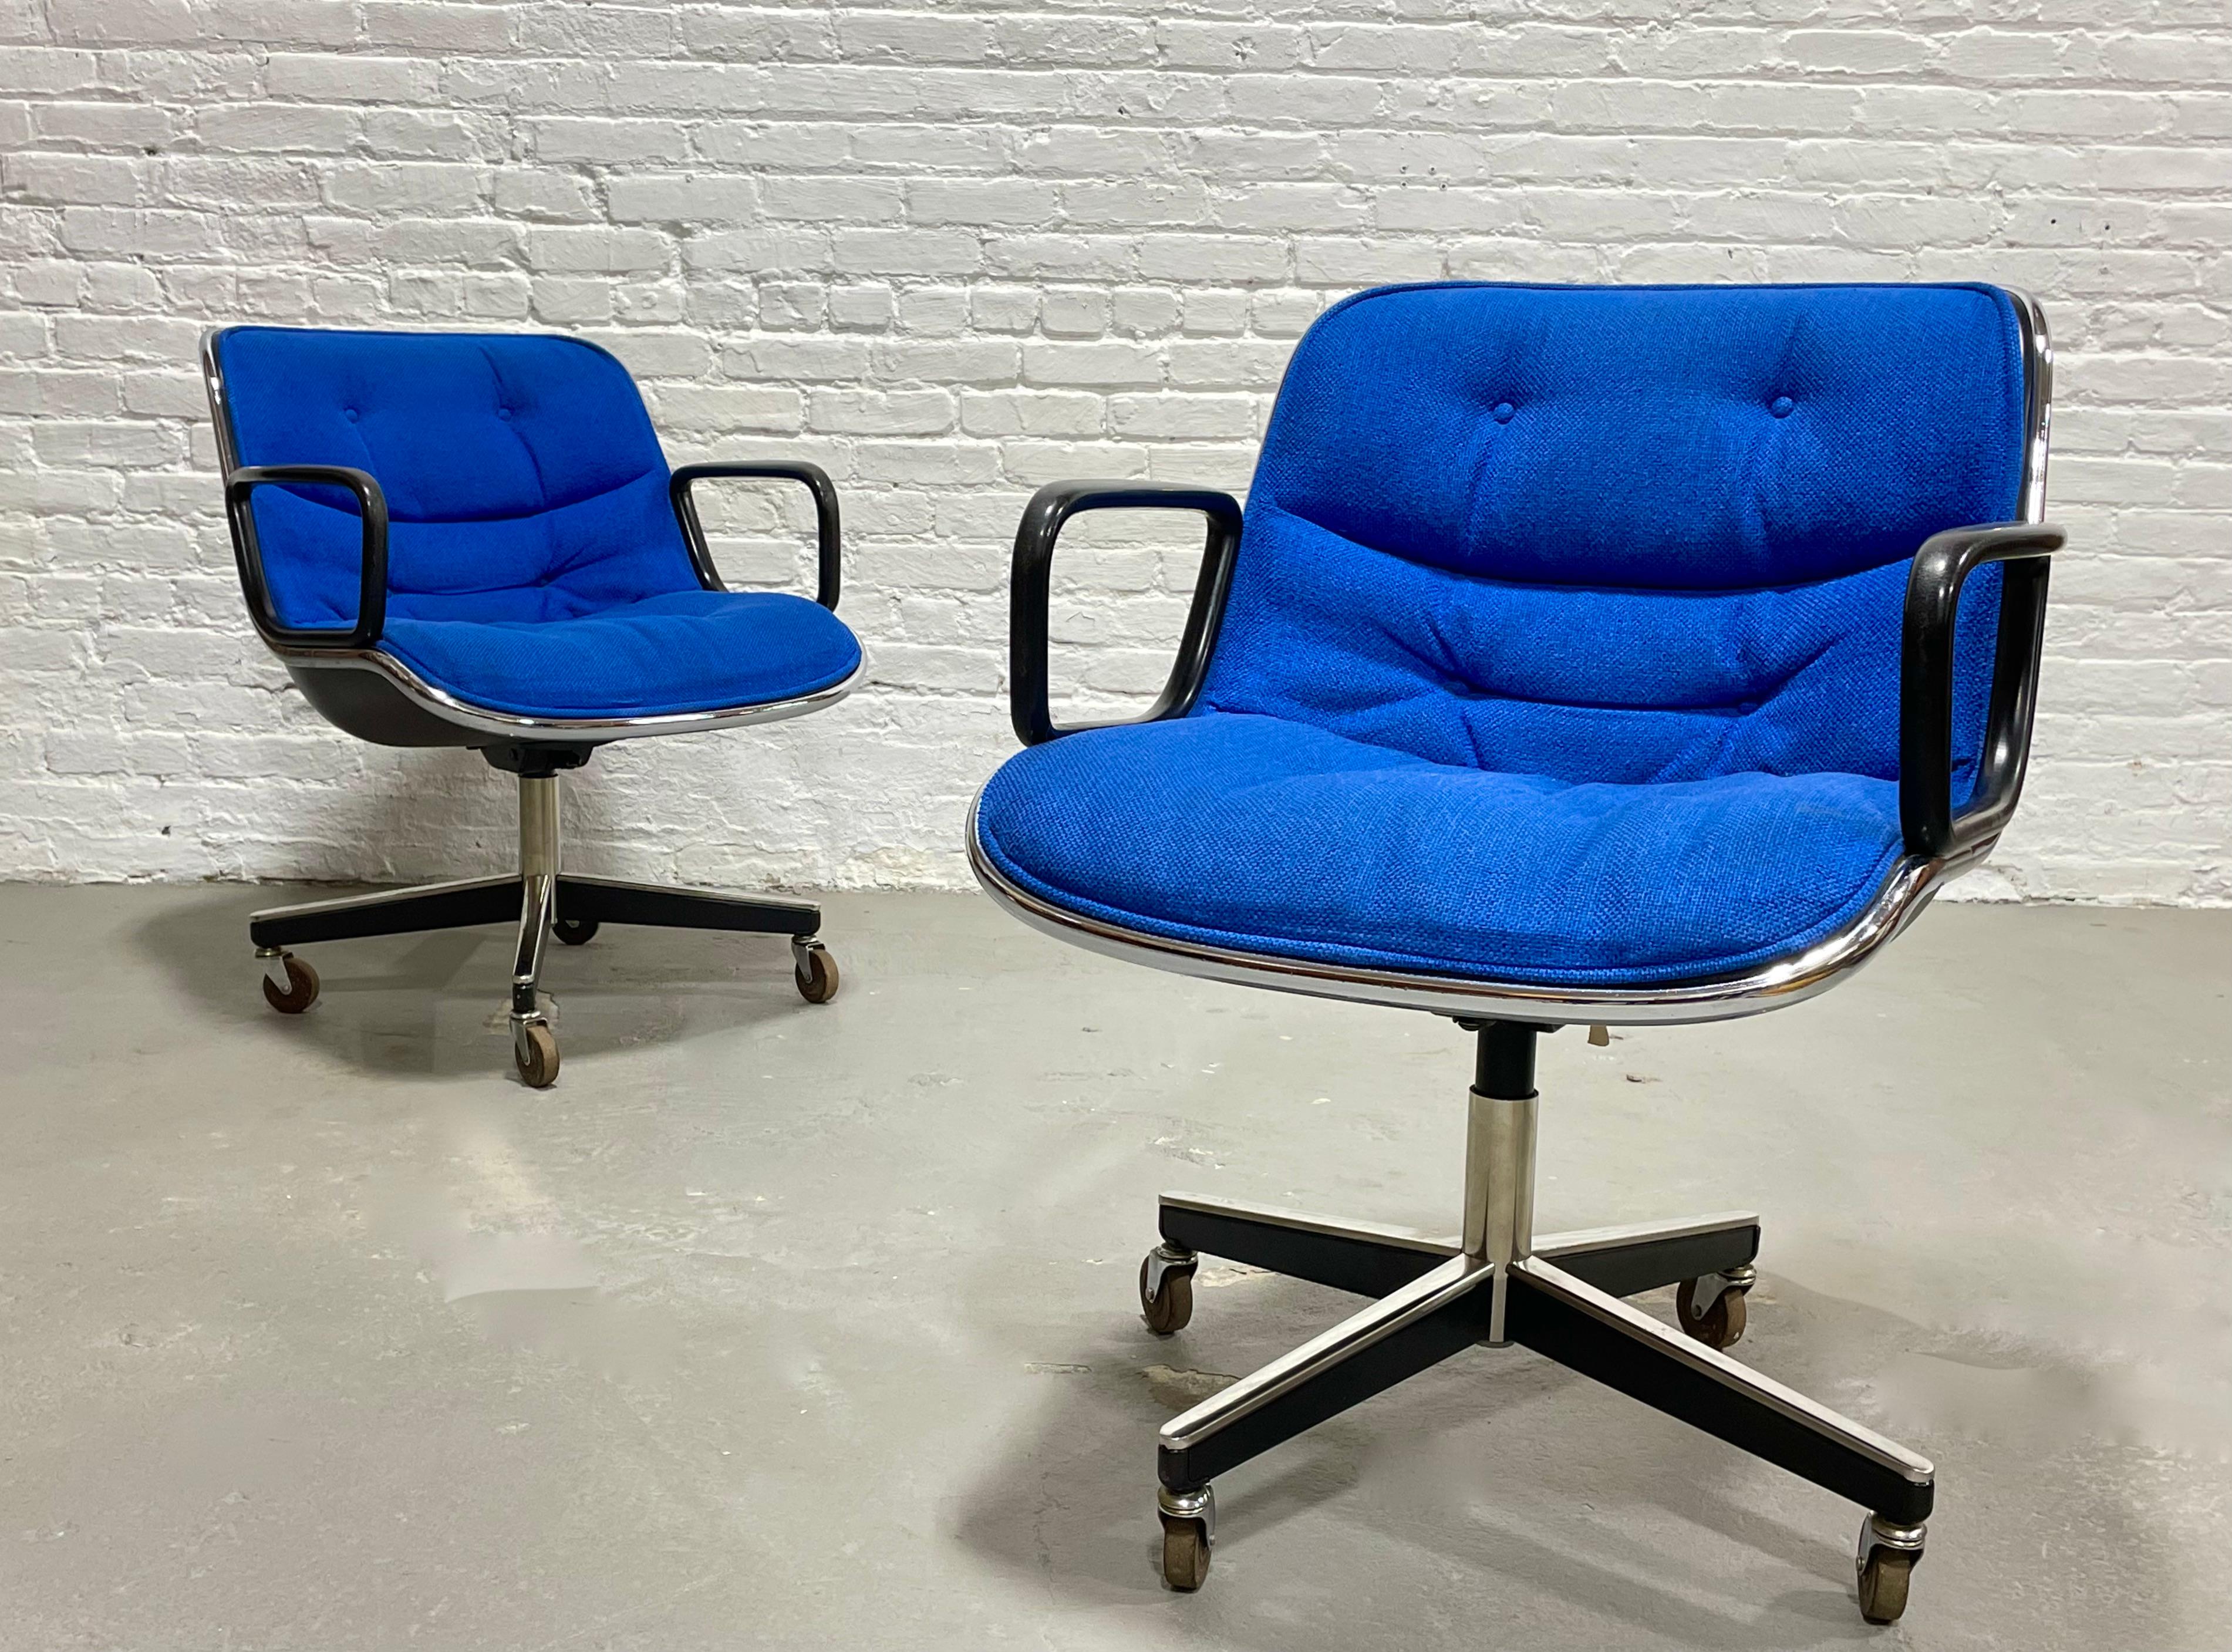 Mid-Century Modern royal blue pollock knoll office chair. Superbly comfortable chair and perfectly tufted with all buttons intact. The gorgeous bright royal blue is a rare color for this chair and contrasts beautifully with the black and chrome